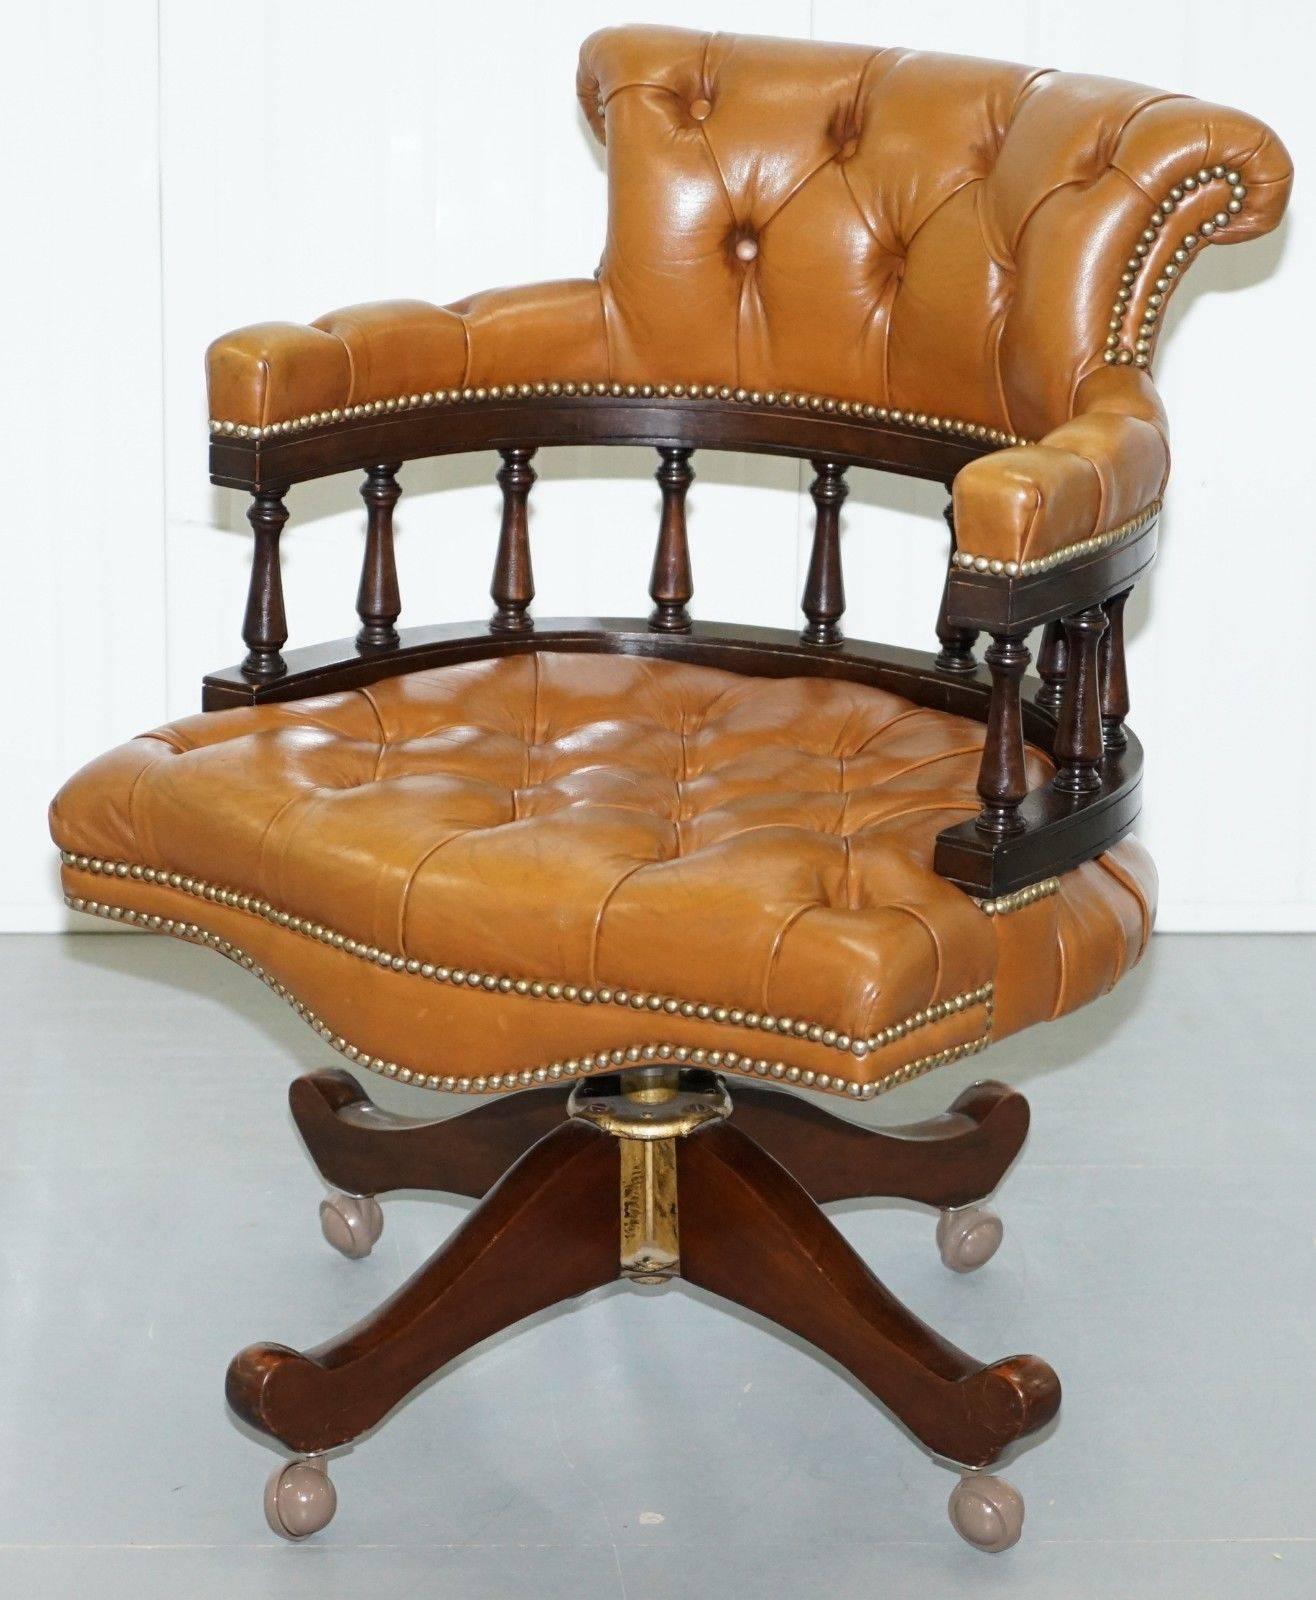 We are delighted to offer for sale this lovely vintage original Chesterfield tan aged brown leather captain’s chair

I have two of these in stock, the other has a slightly darker upholstery 

The chair was made by the Original Chesterfield